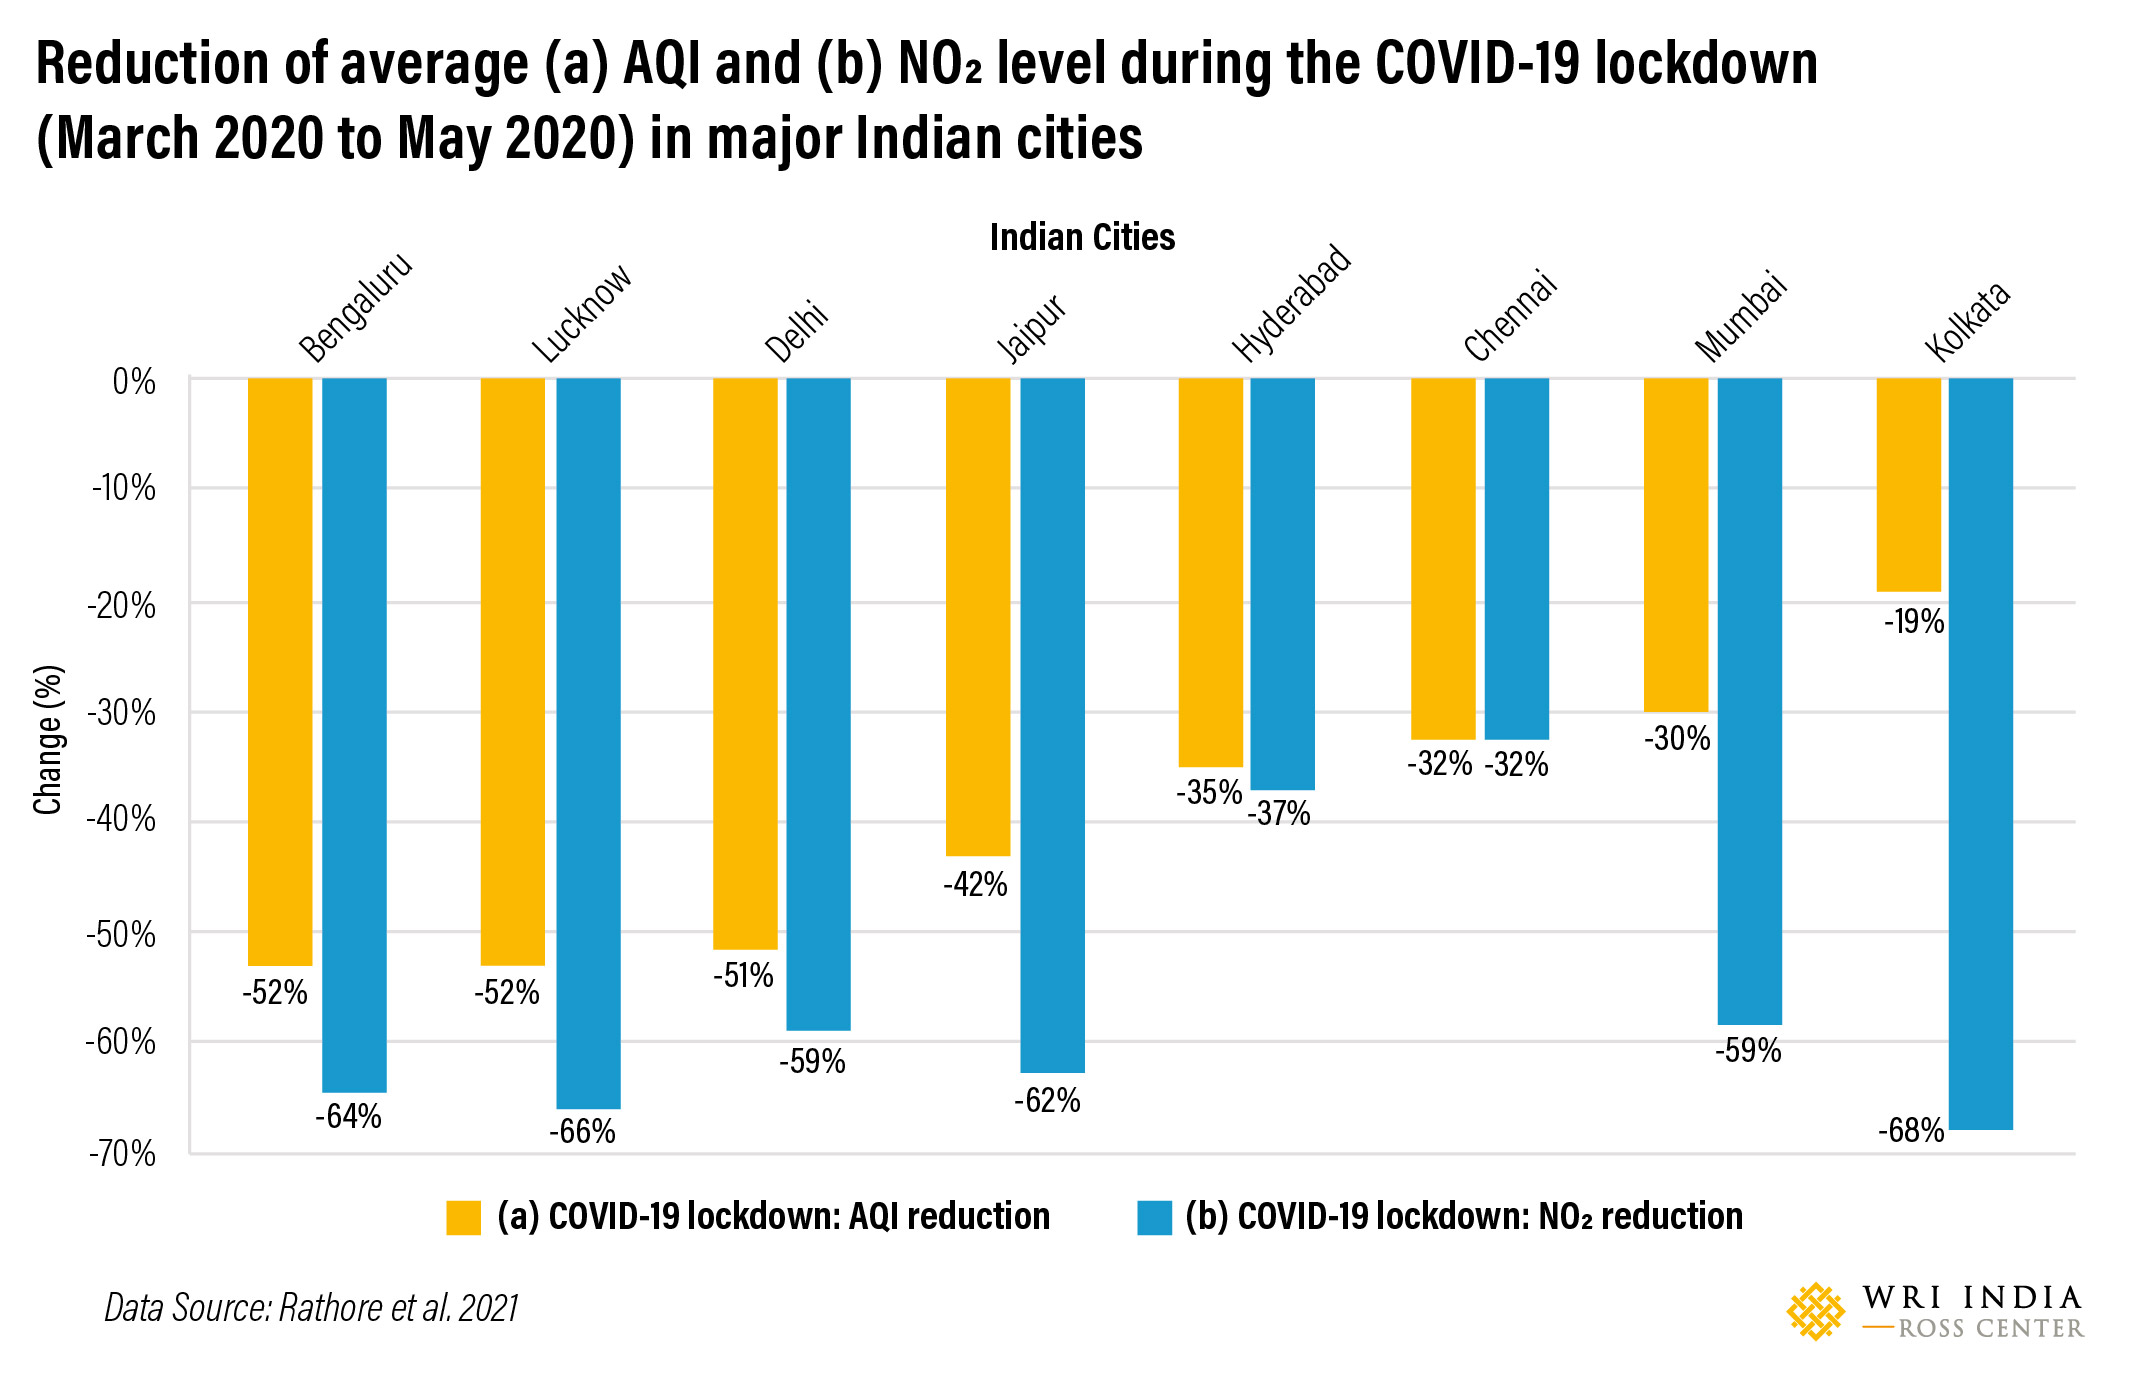 Reduction in average (a) AQI and (b) NO2 level during the COVID-19 lockdown (March 2020 to May 2020) compared to the same period of 2019 in major Indian cities